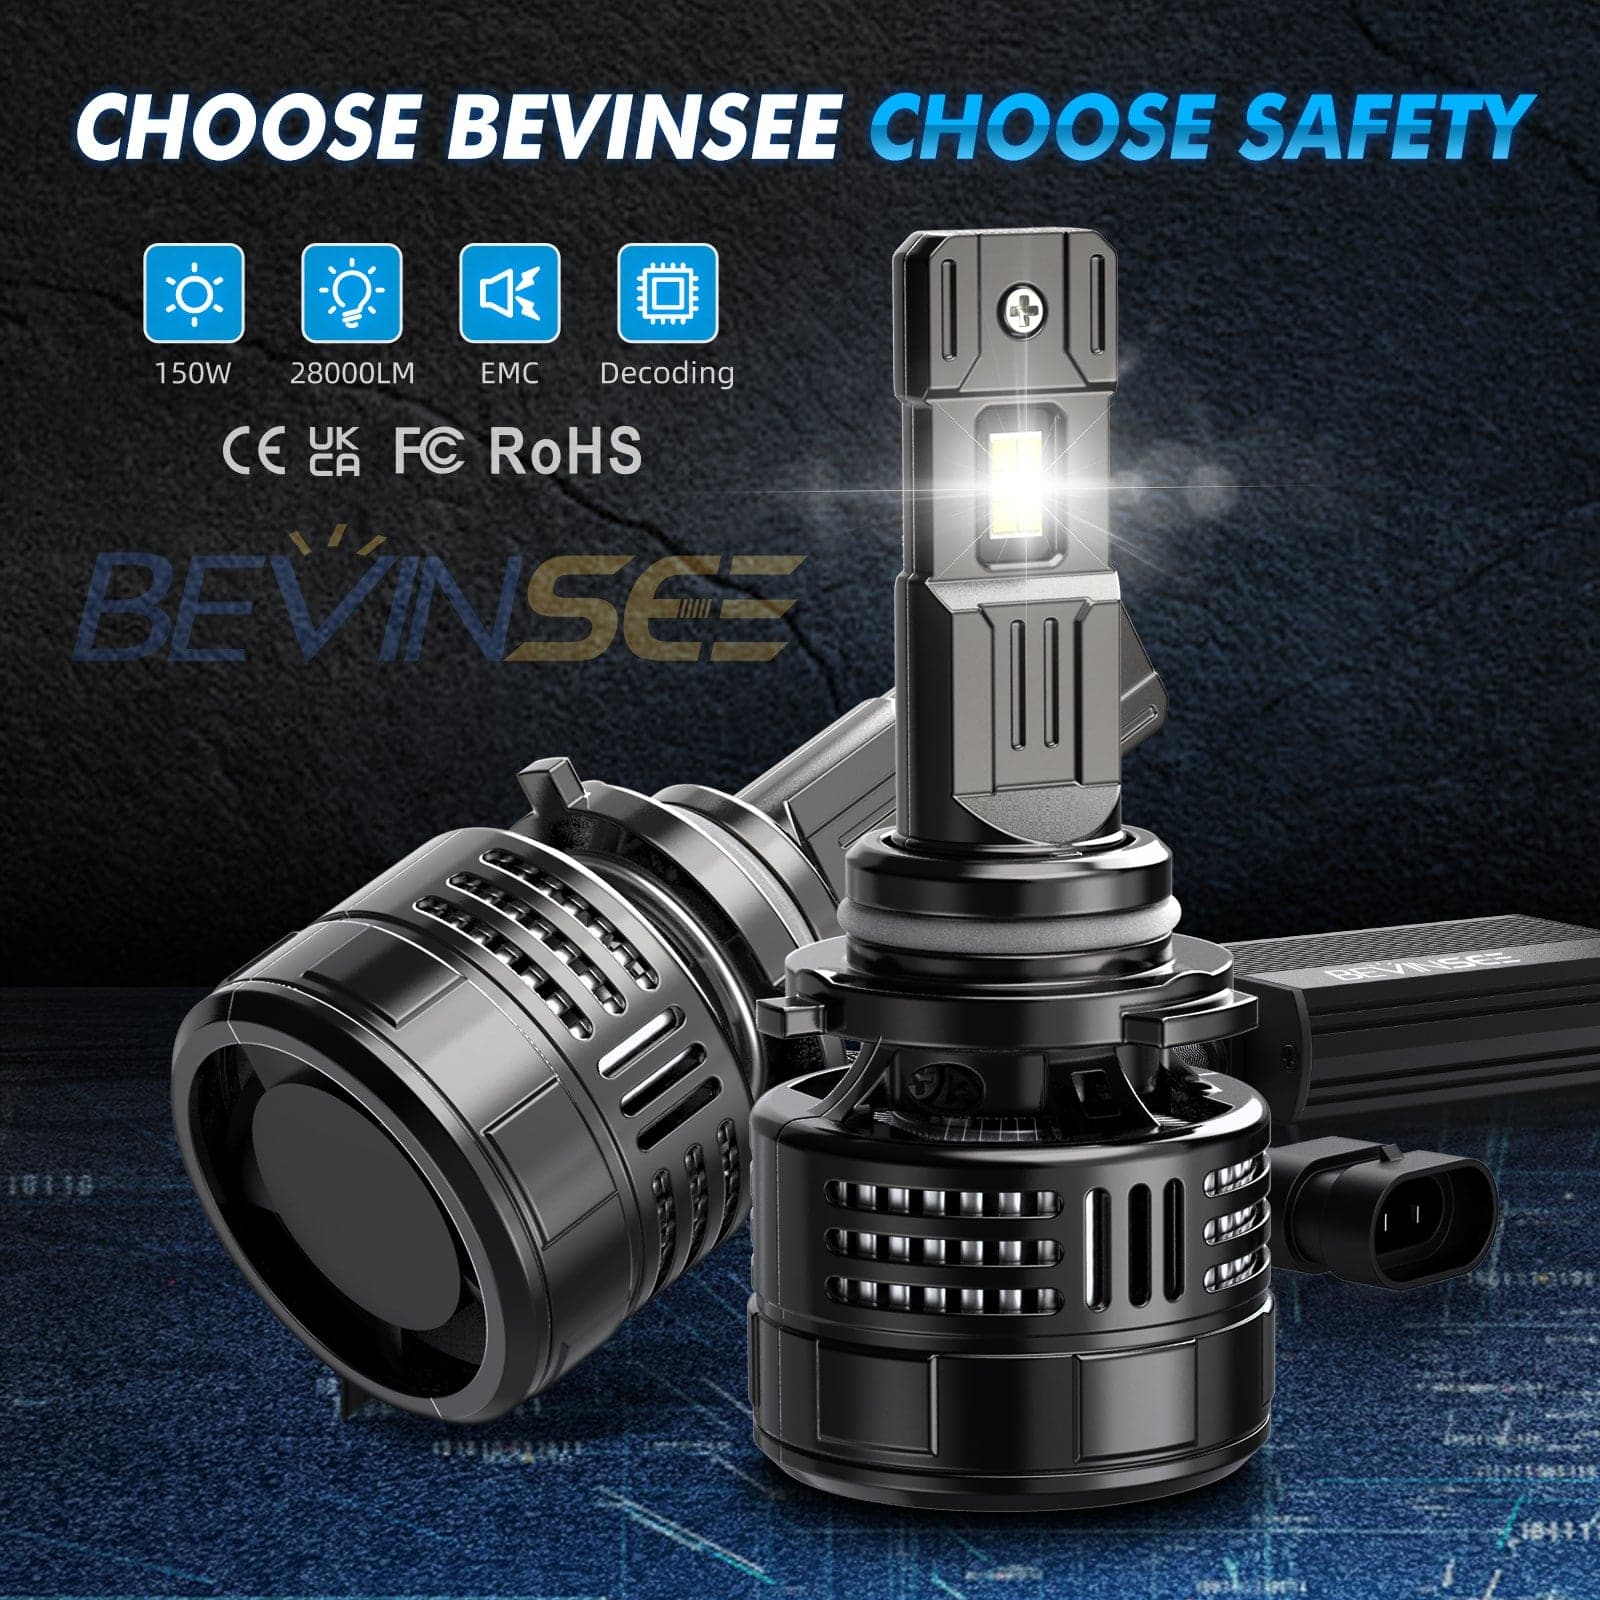 BEVINSEE V55 Upgrade 9005 LED Headlight Bulb 150W/Pair 28,000LM Canbus